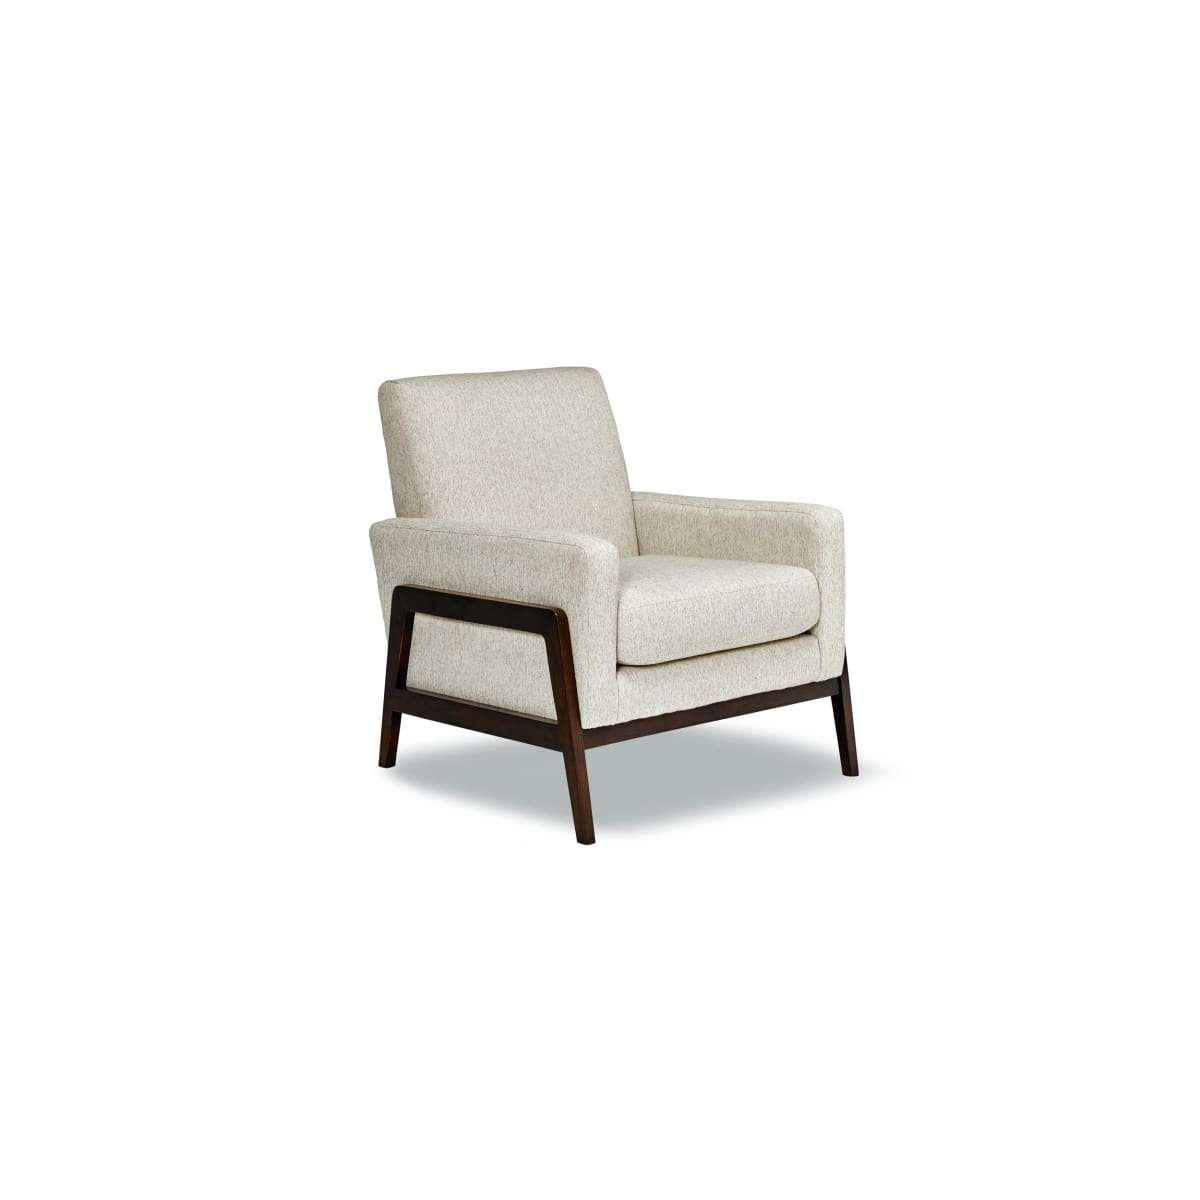 Jase Accent chair - accent chairs